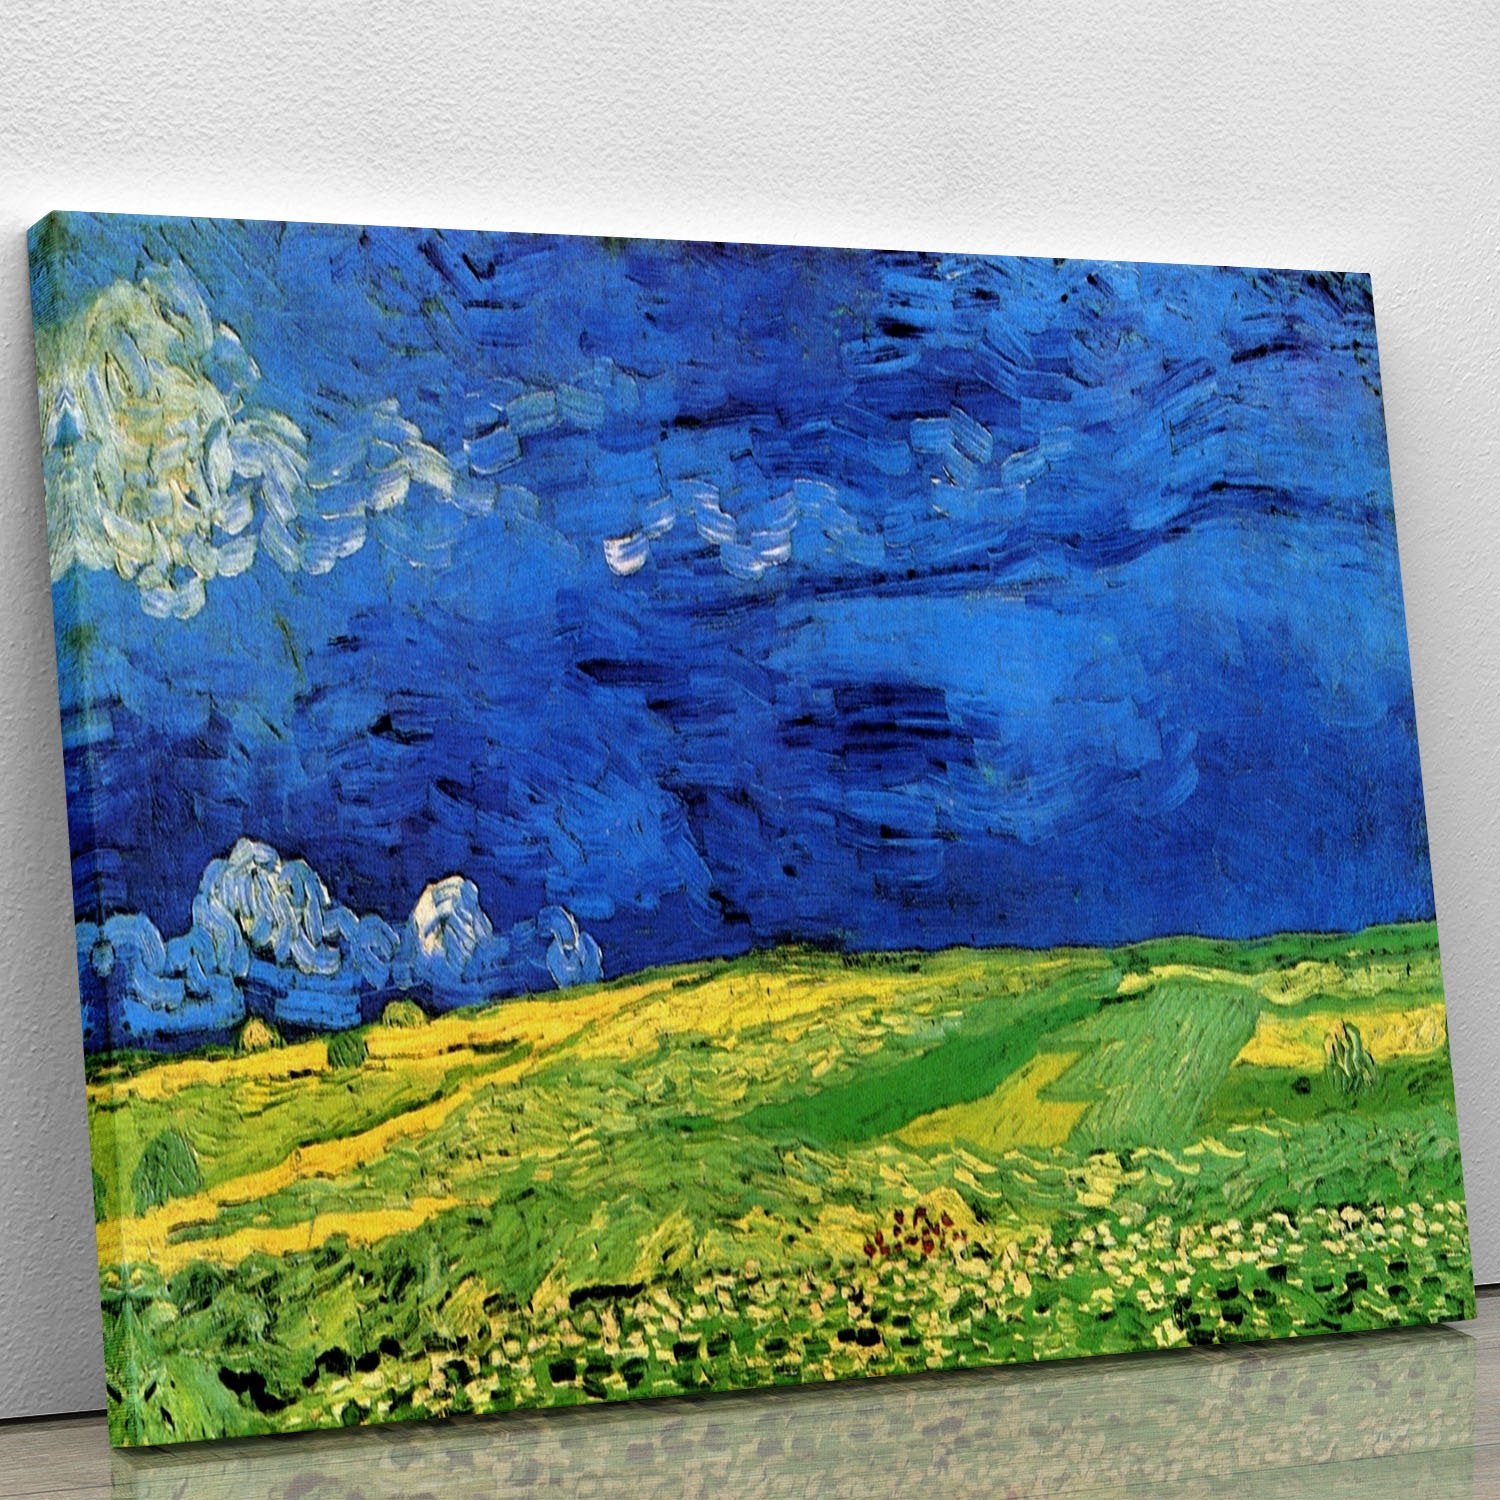 Wheat Field Under Clouded Sky by Van Gogh Canvas Print or Poster